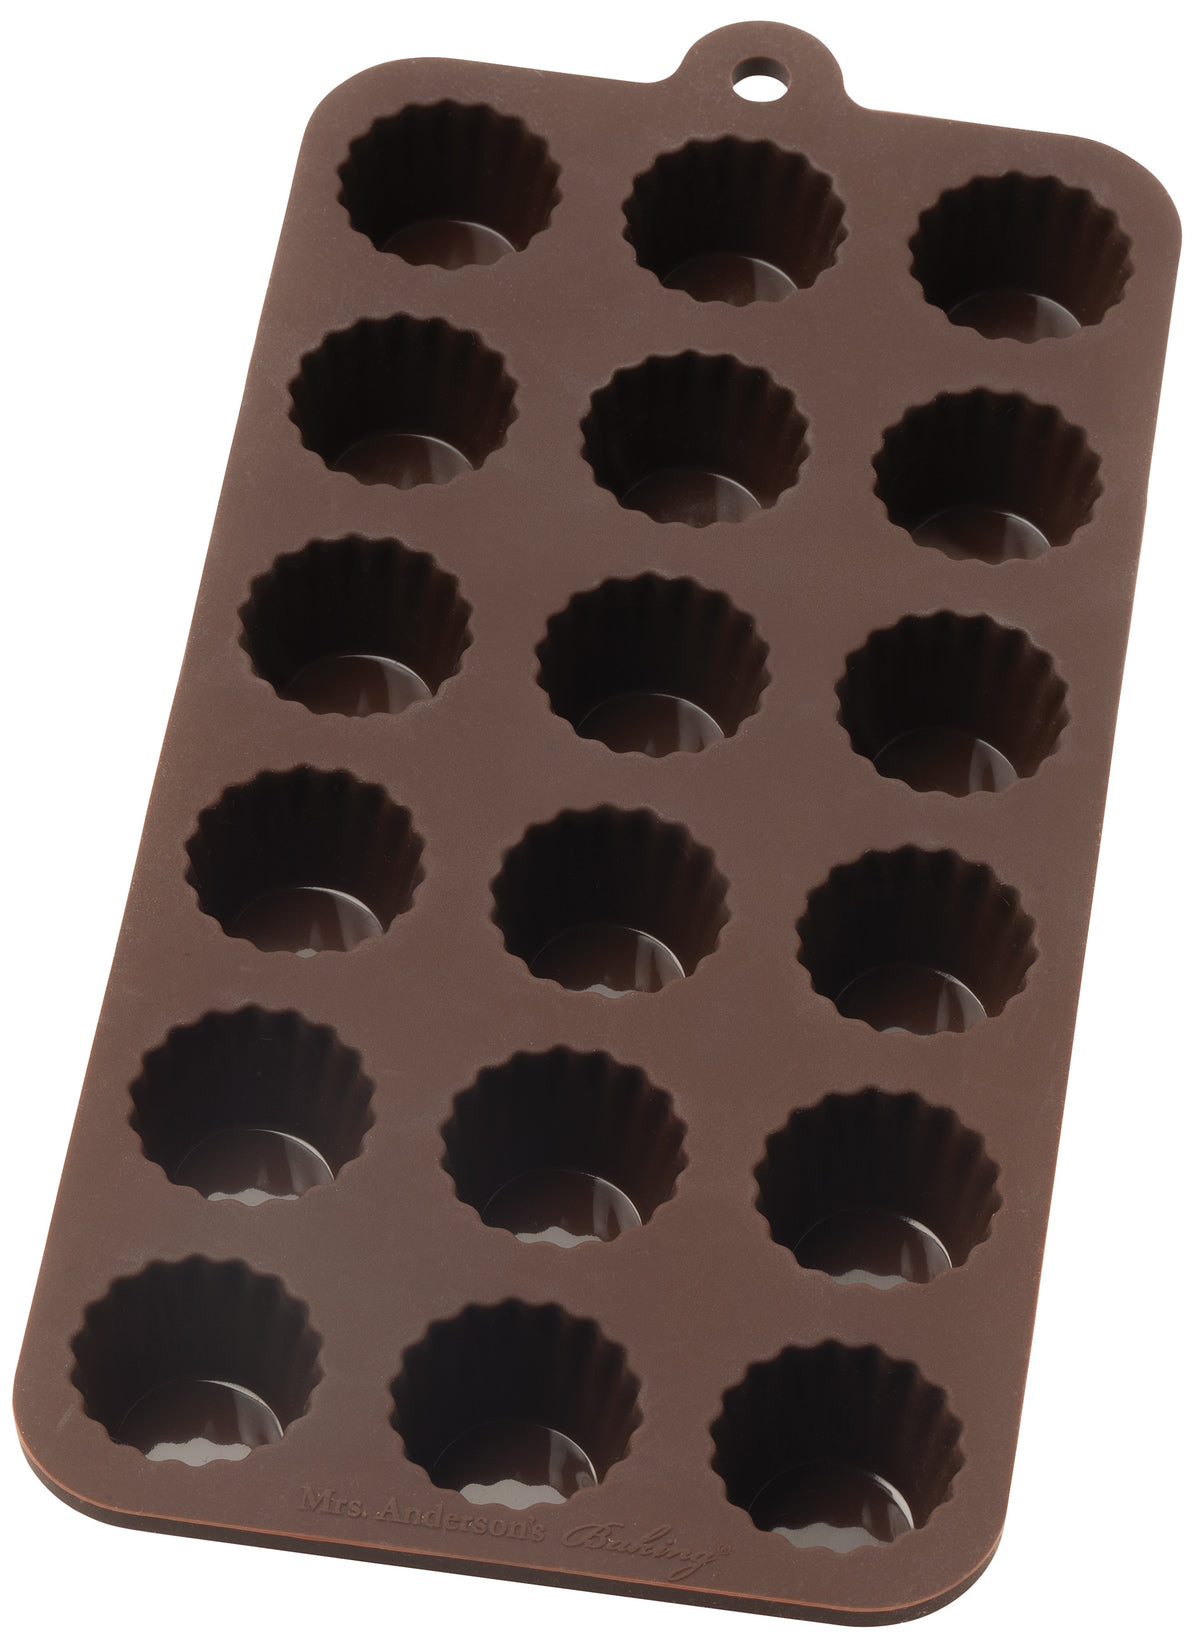 Mrs. Anderson's 43766 Baking Cordial Cup Chocolate Mold, Brown